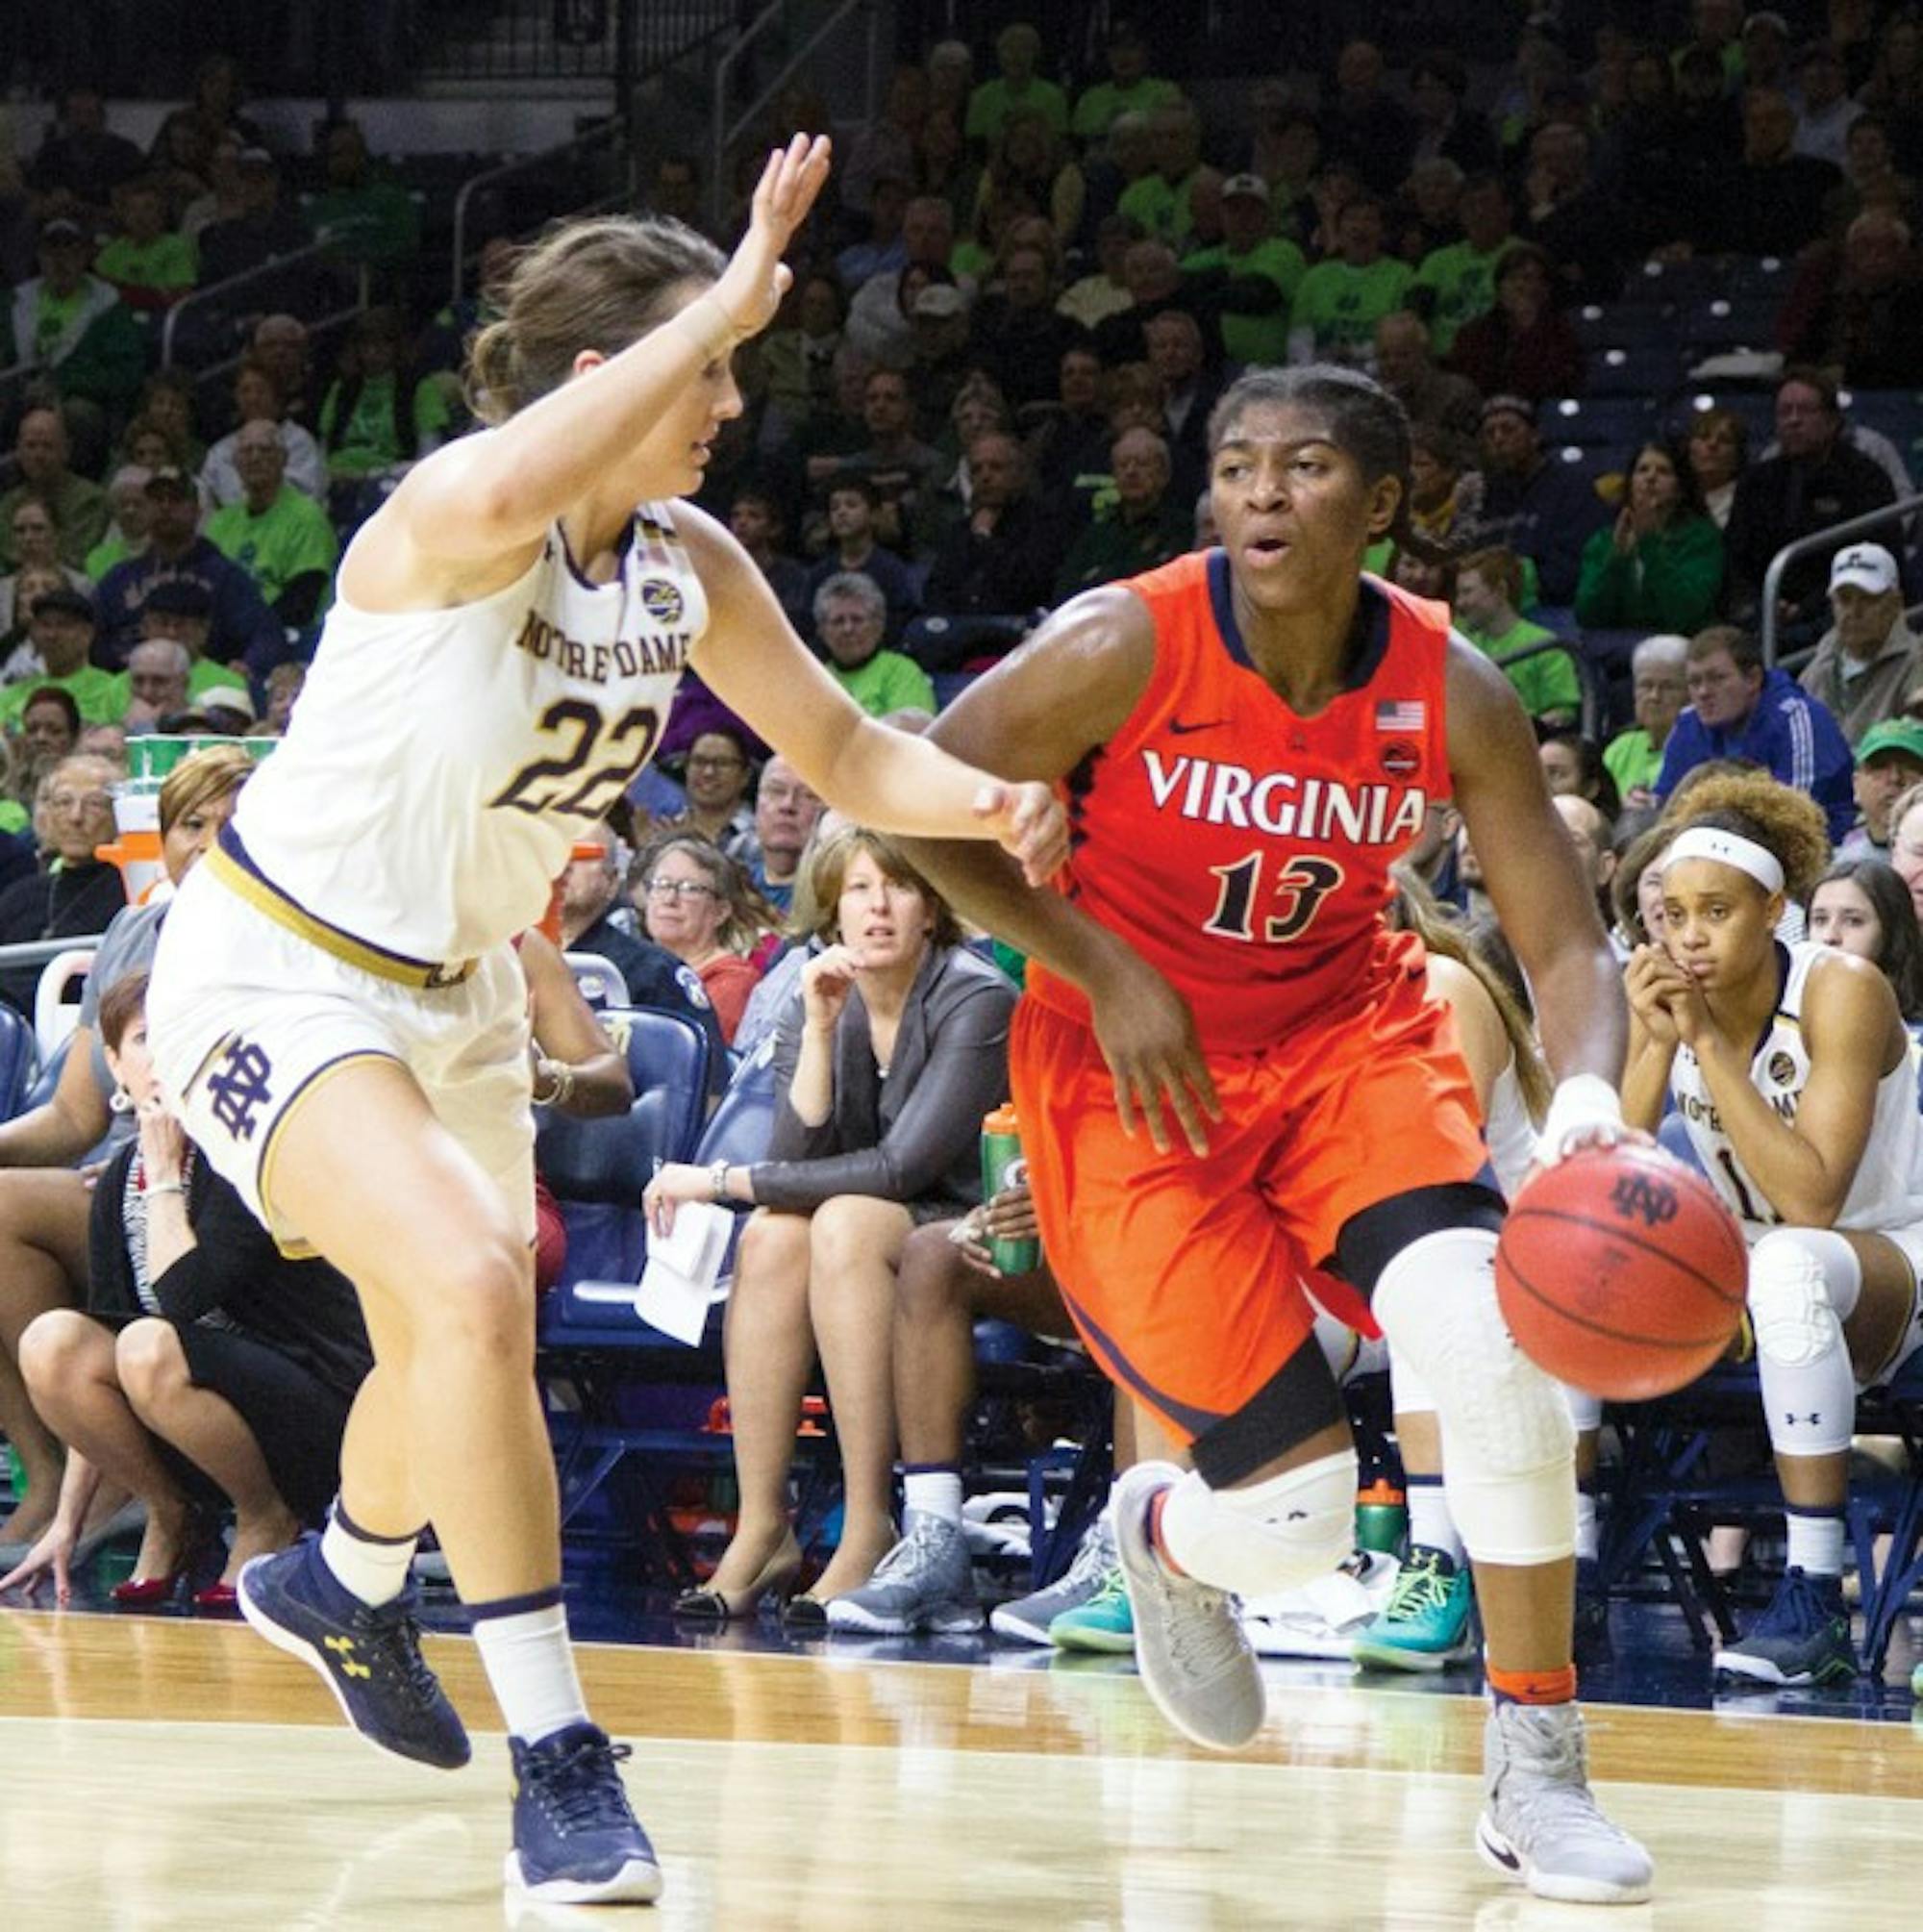 Irish freshman forward Erin Boley guards a driving Virginia player during Notre Dame's 82-74 victory over the Cavaliers on Sunday.= at Purcell Pavilion.